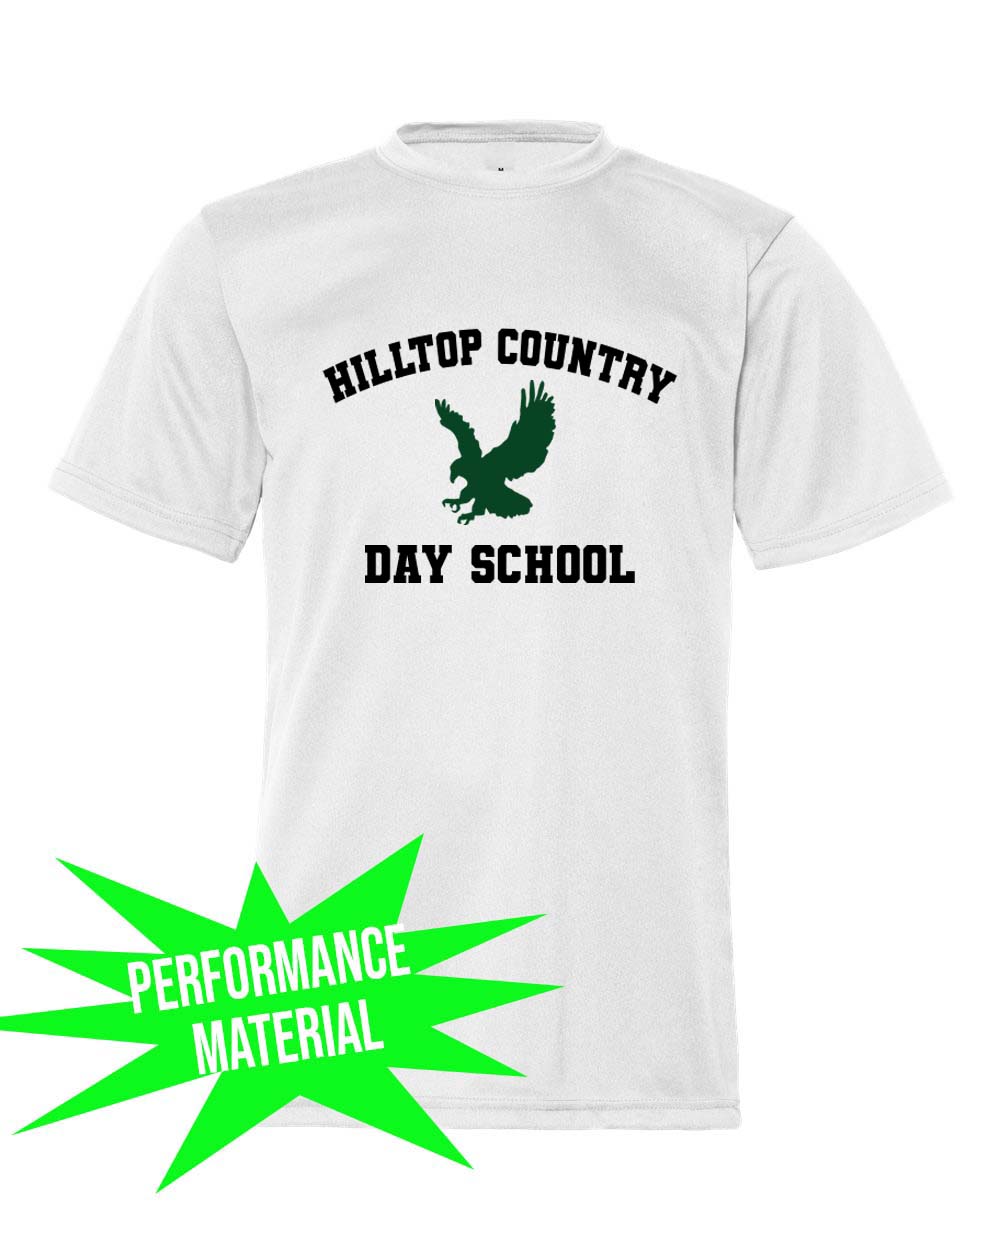 Hilltop Country Day School Performance Material design 1 T-Shirt